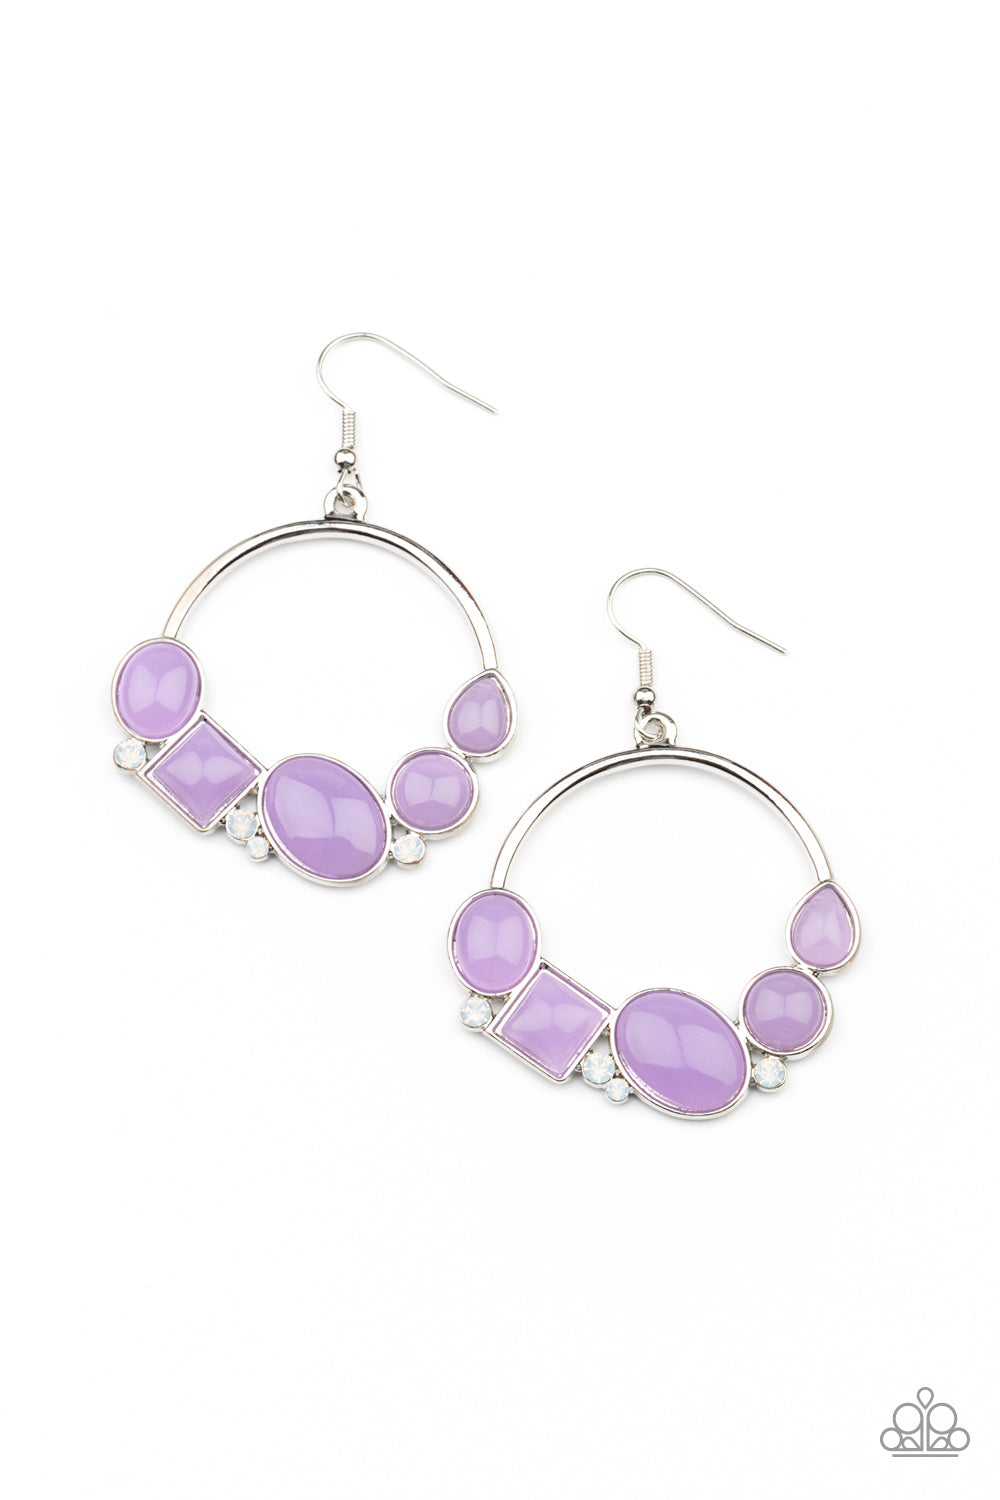 Beautifully Bubblicious - Purple and Silver Earrings - Paparazzi Jewelry  - Bejeweled Accessories By Kristie - Dainty opalescent white rhinestones are sprinkled between dewy oval, square, and circular purple beads along the bottom of a silver hoop, creating a bubbly pop of color. Earring attaches to a standard fishhook fitting. Sold as one pair of earrings.